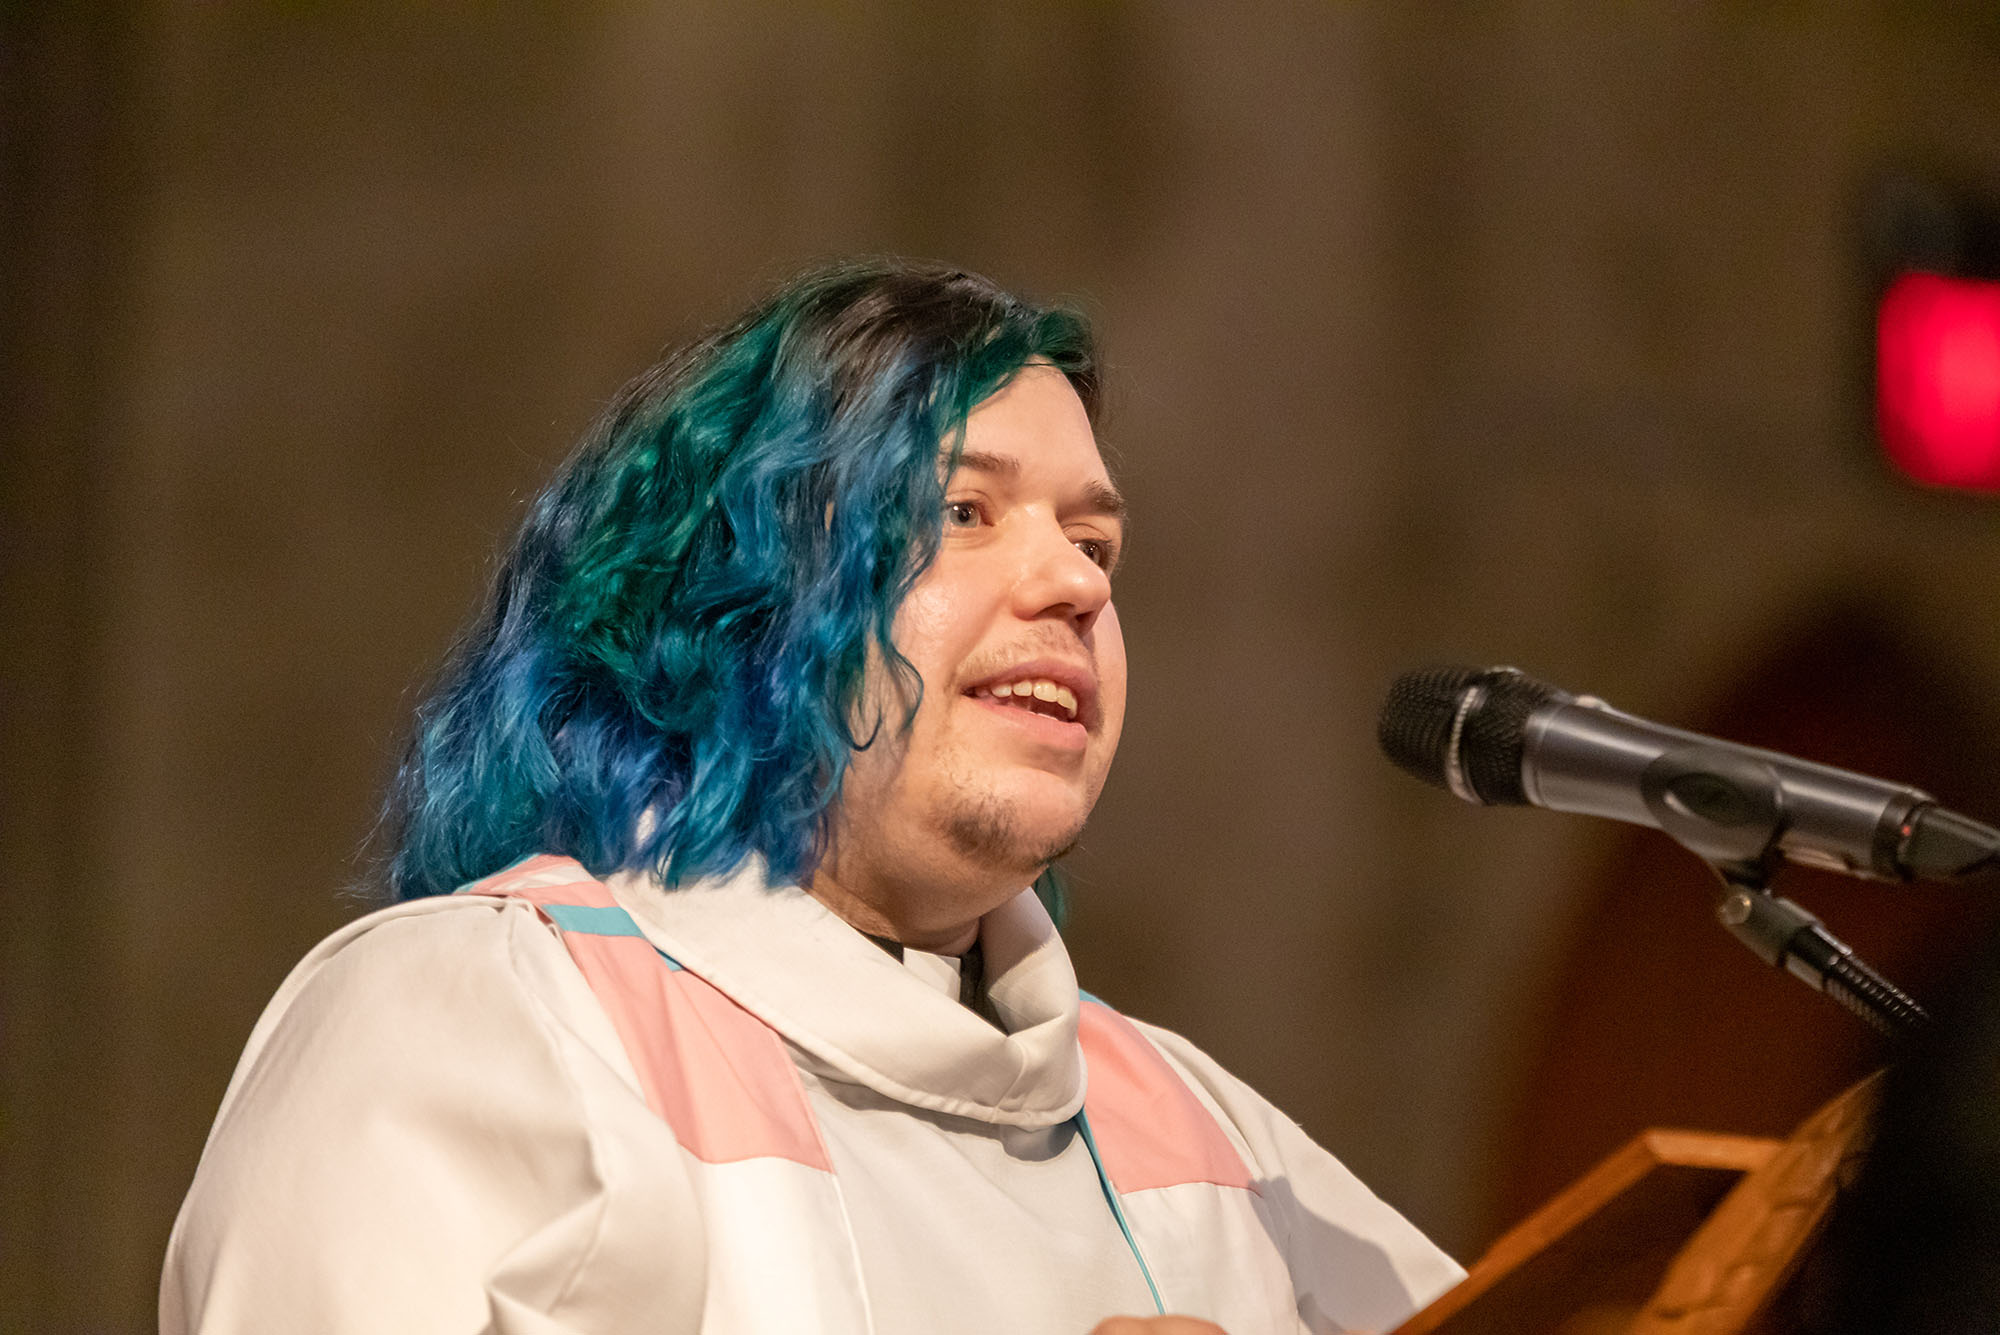 photo of Kori Pacyniak giving a sermon. They wear traditional priests robes and don blue hair.